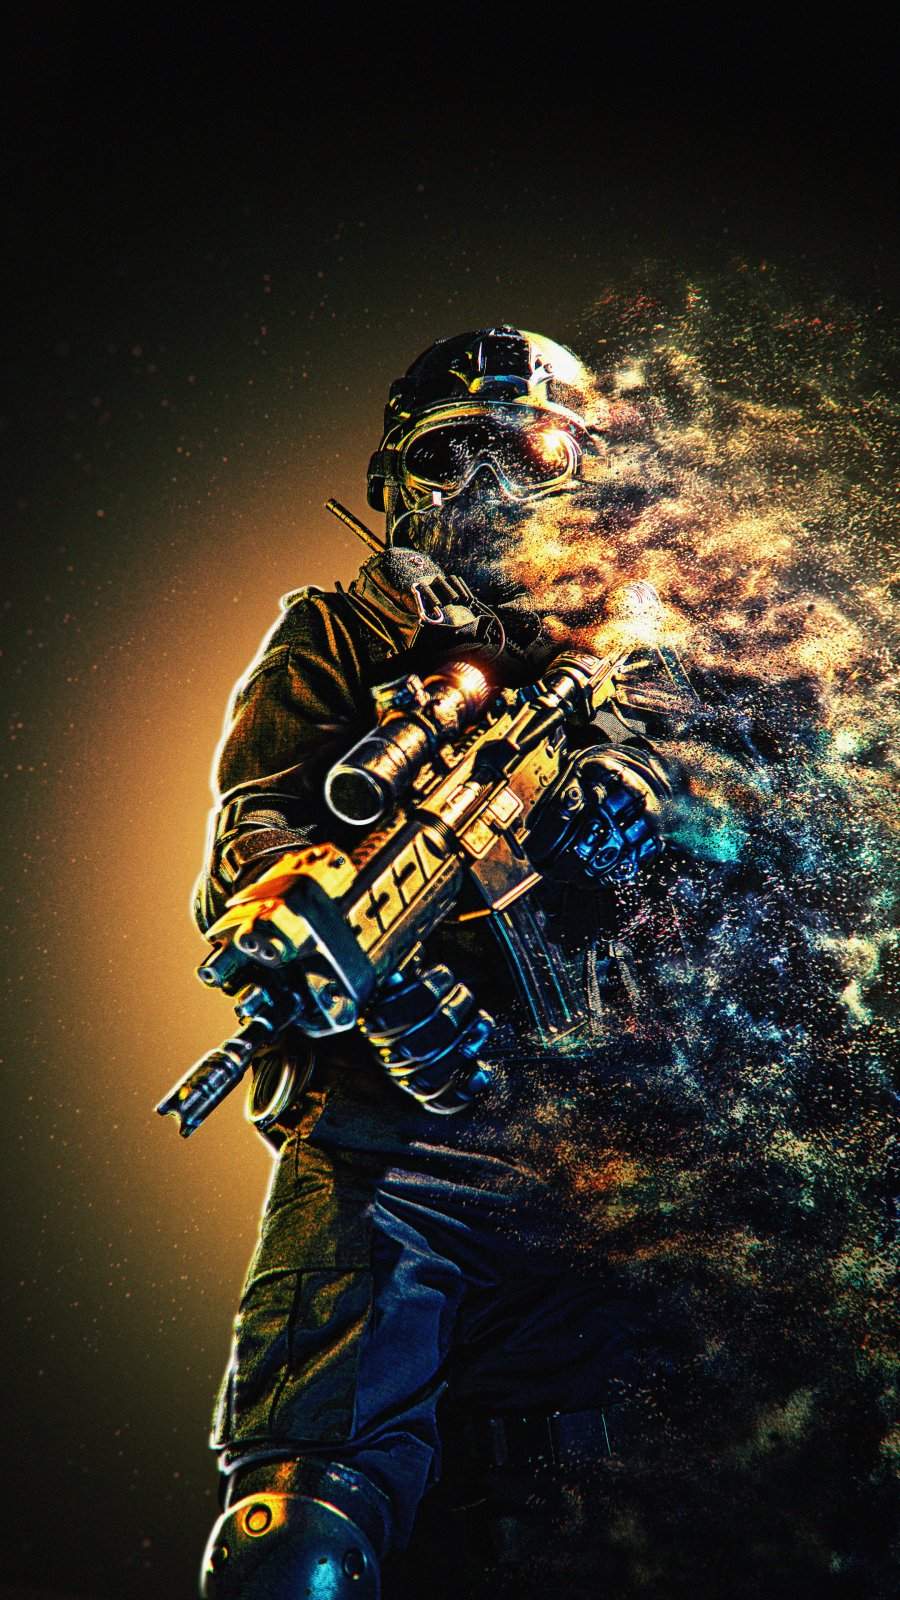 Army Soldier iPhone Wallpaper